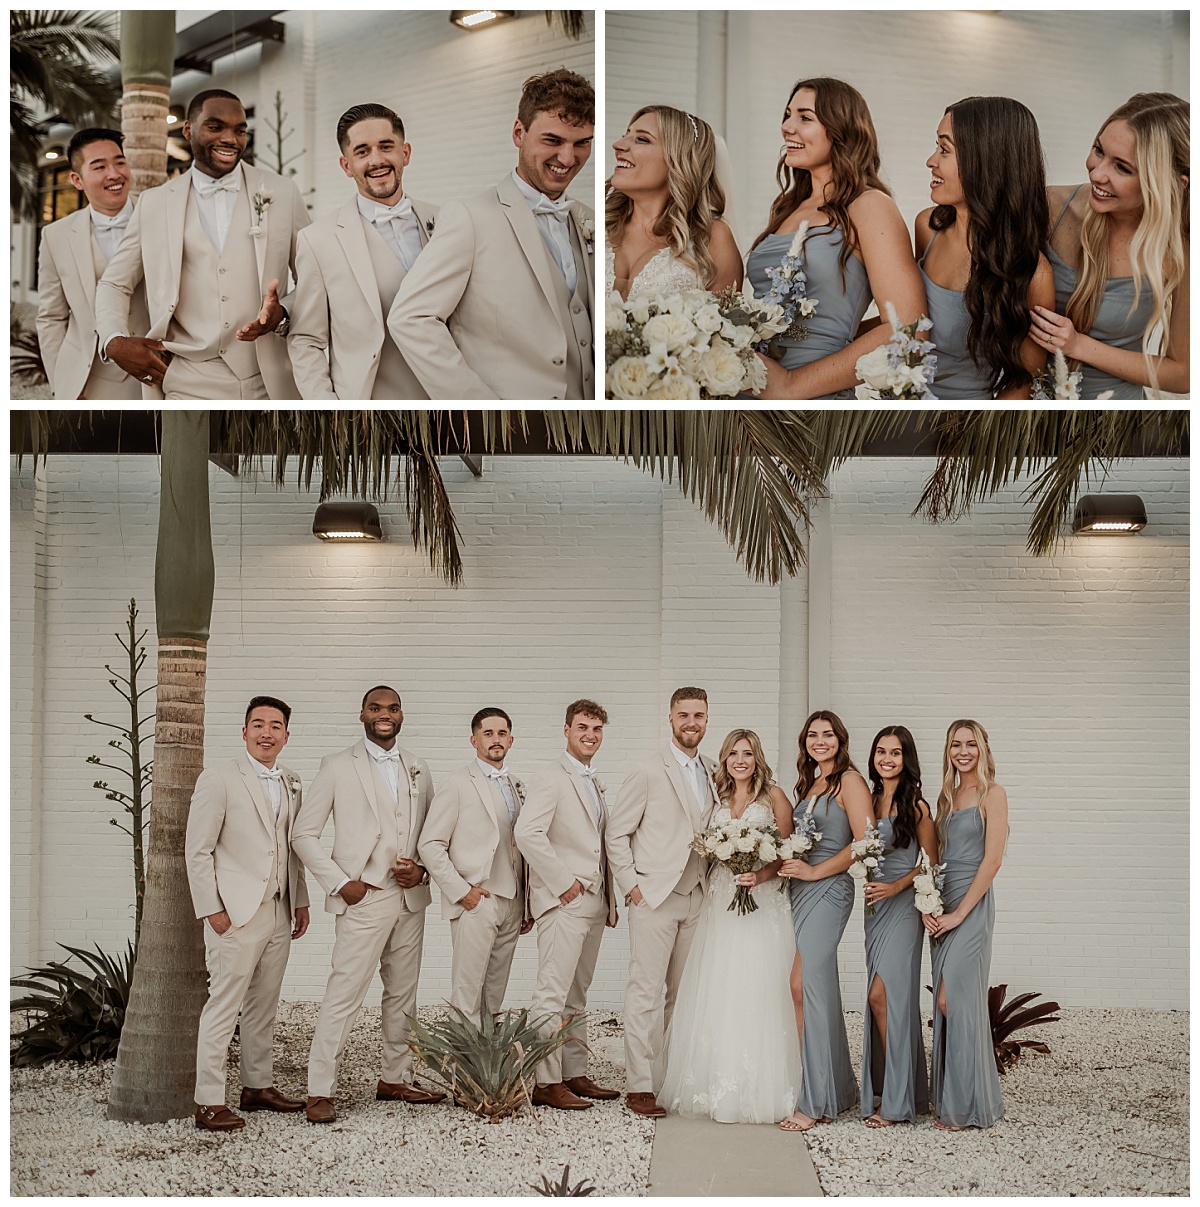 Bridal Party in dusty blue dresses and khaki tuxedos for a boho wedding at Haus 820, an industrial wedding venue in Lakeland, FL. 